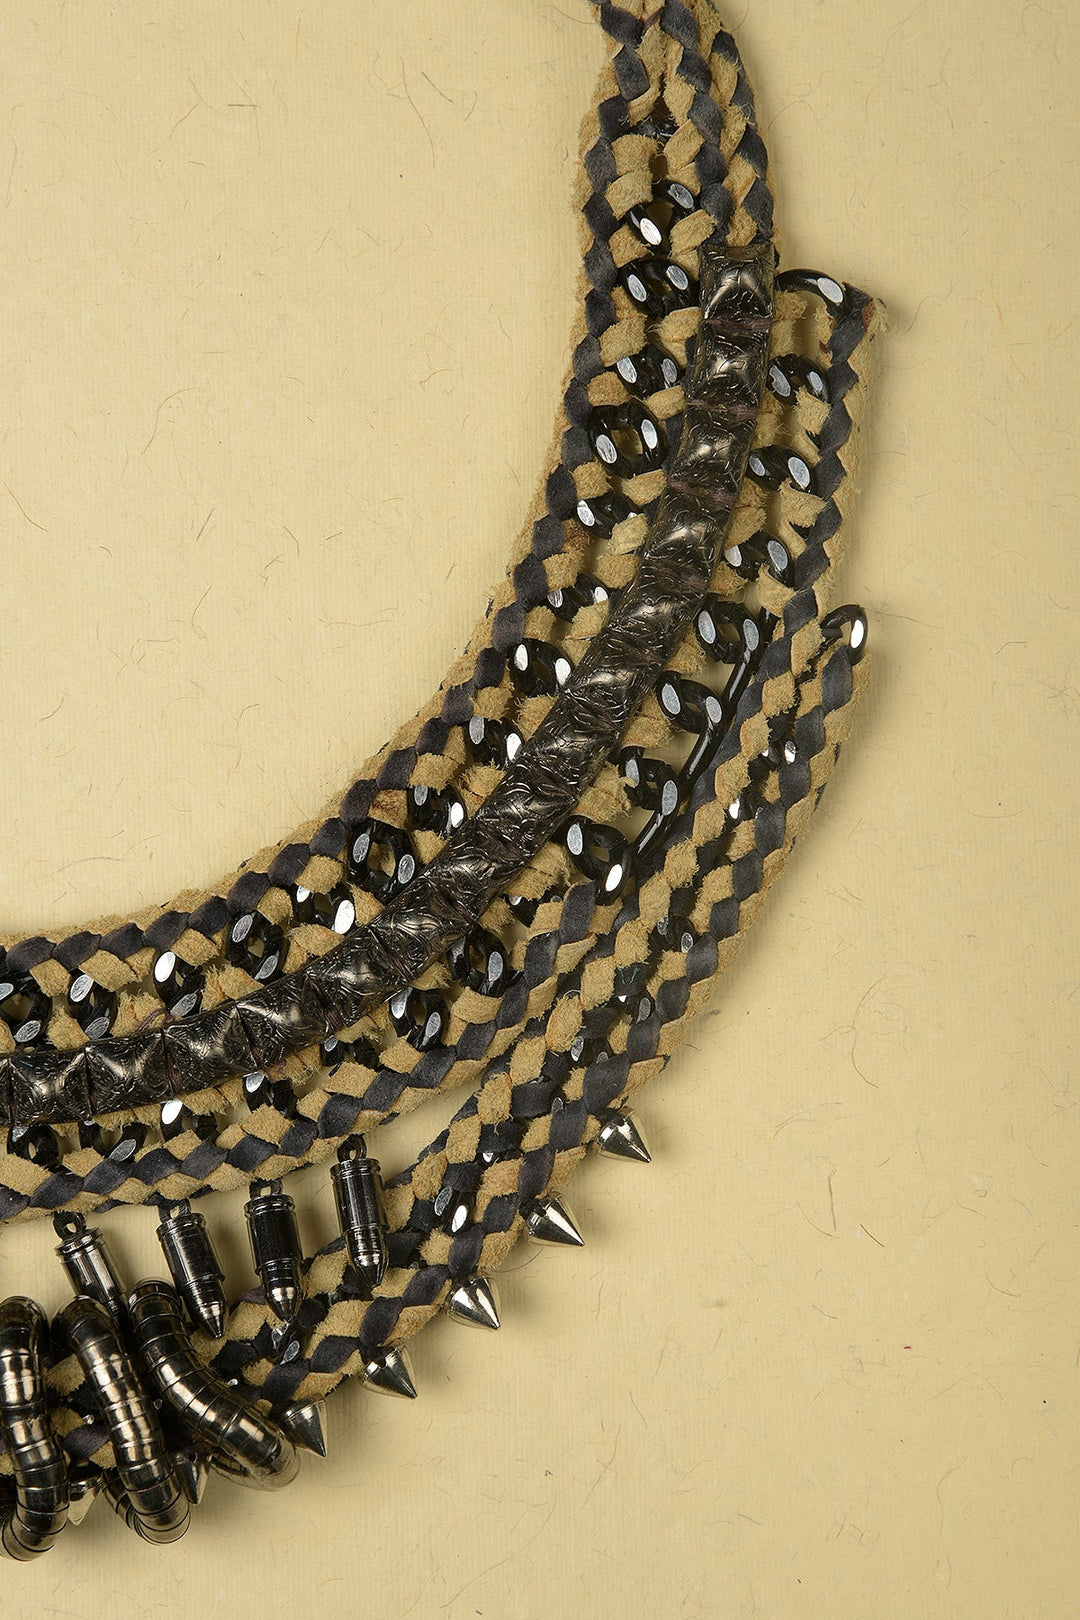 Necklace made of Jute, Suede, Iron Chain, Iron Bullets, Iron Cones and Iron Rings